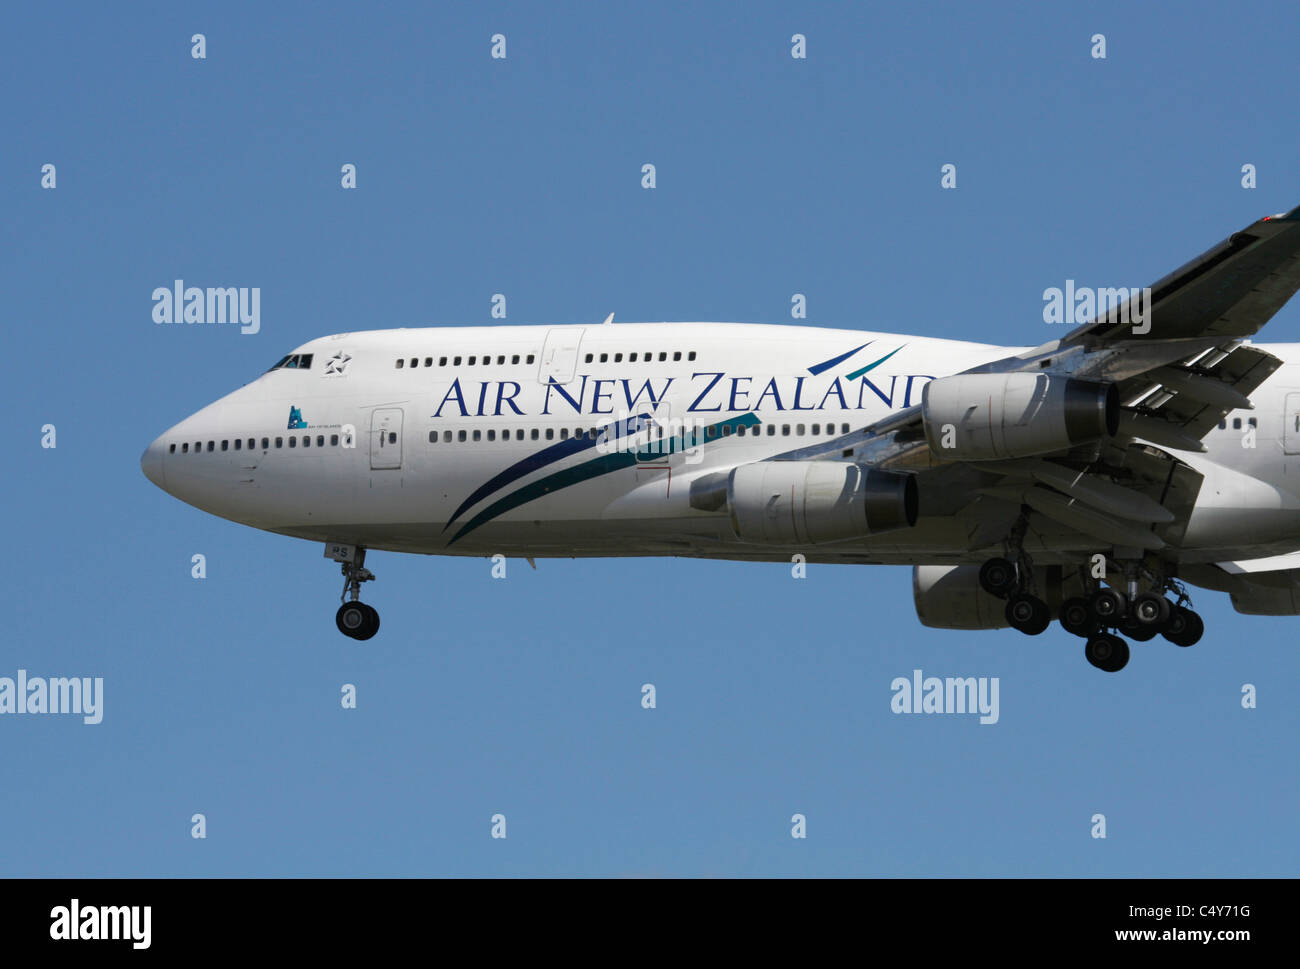 Air New Zealand Boeing 747-400 jet plane flying on approach. Close-up of nose section. Long haul air travel. Stock Photo